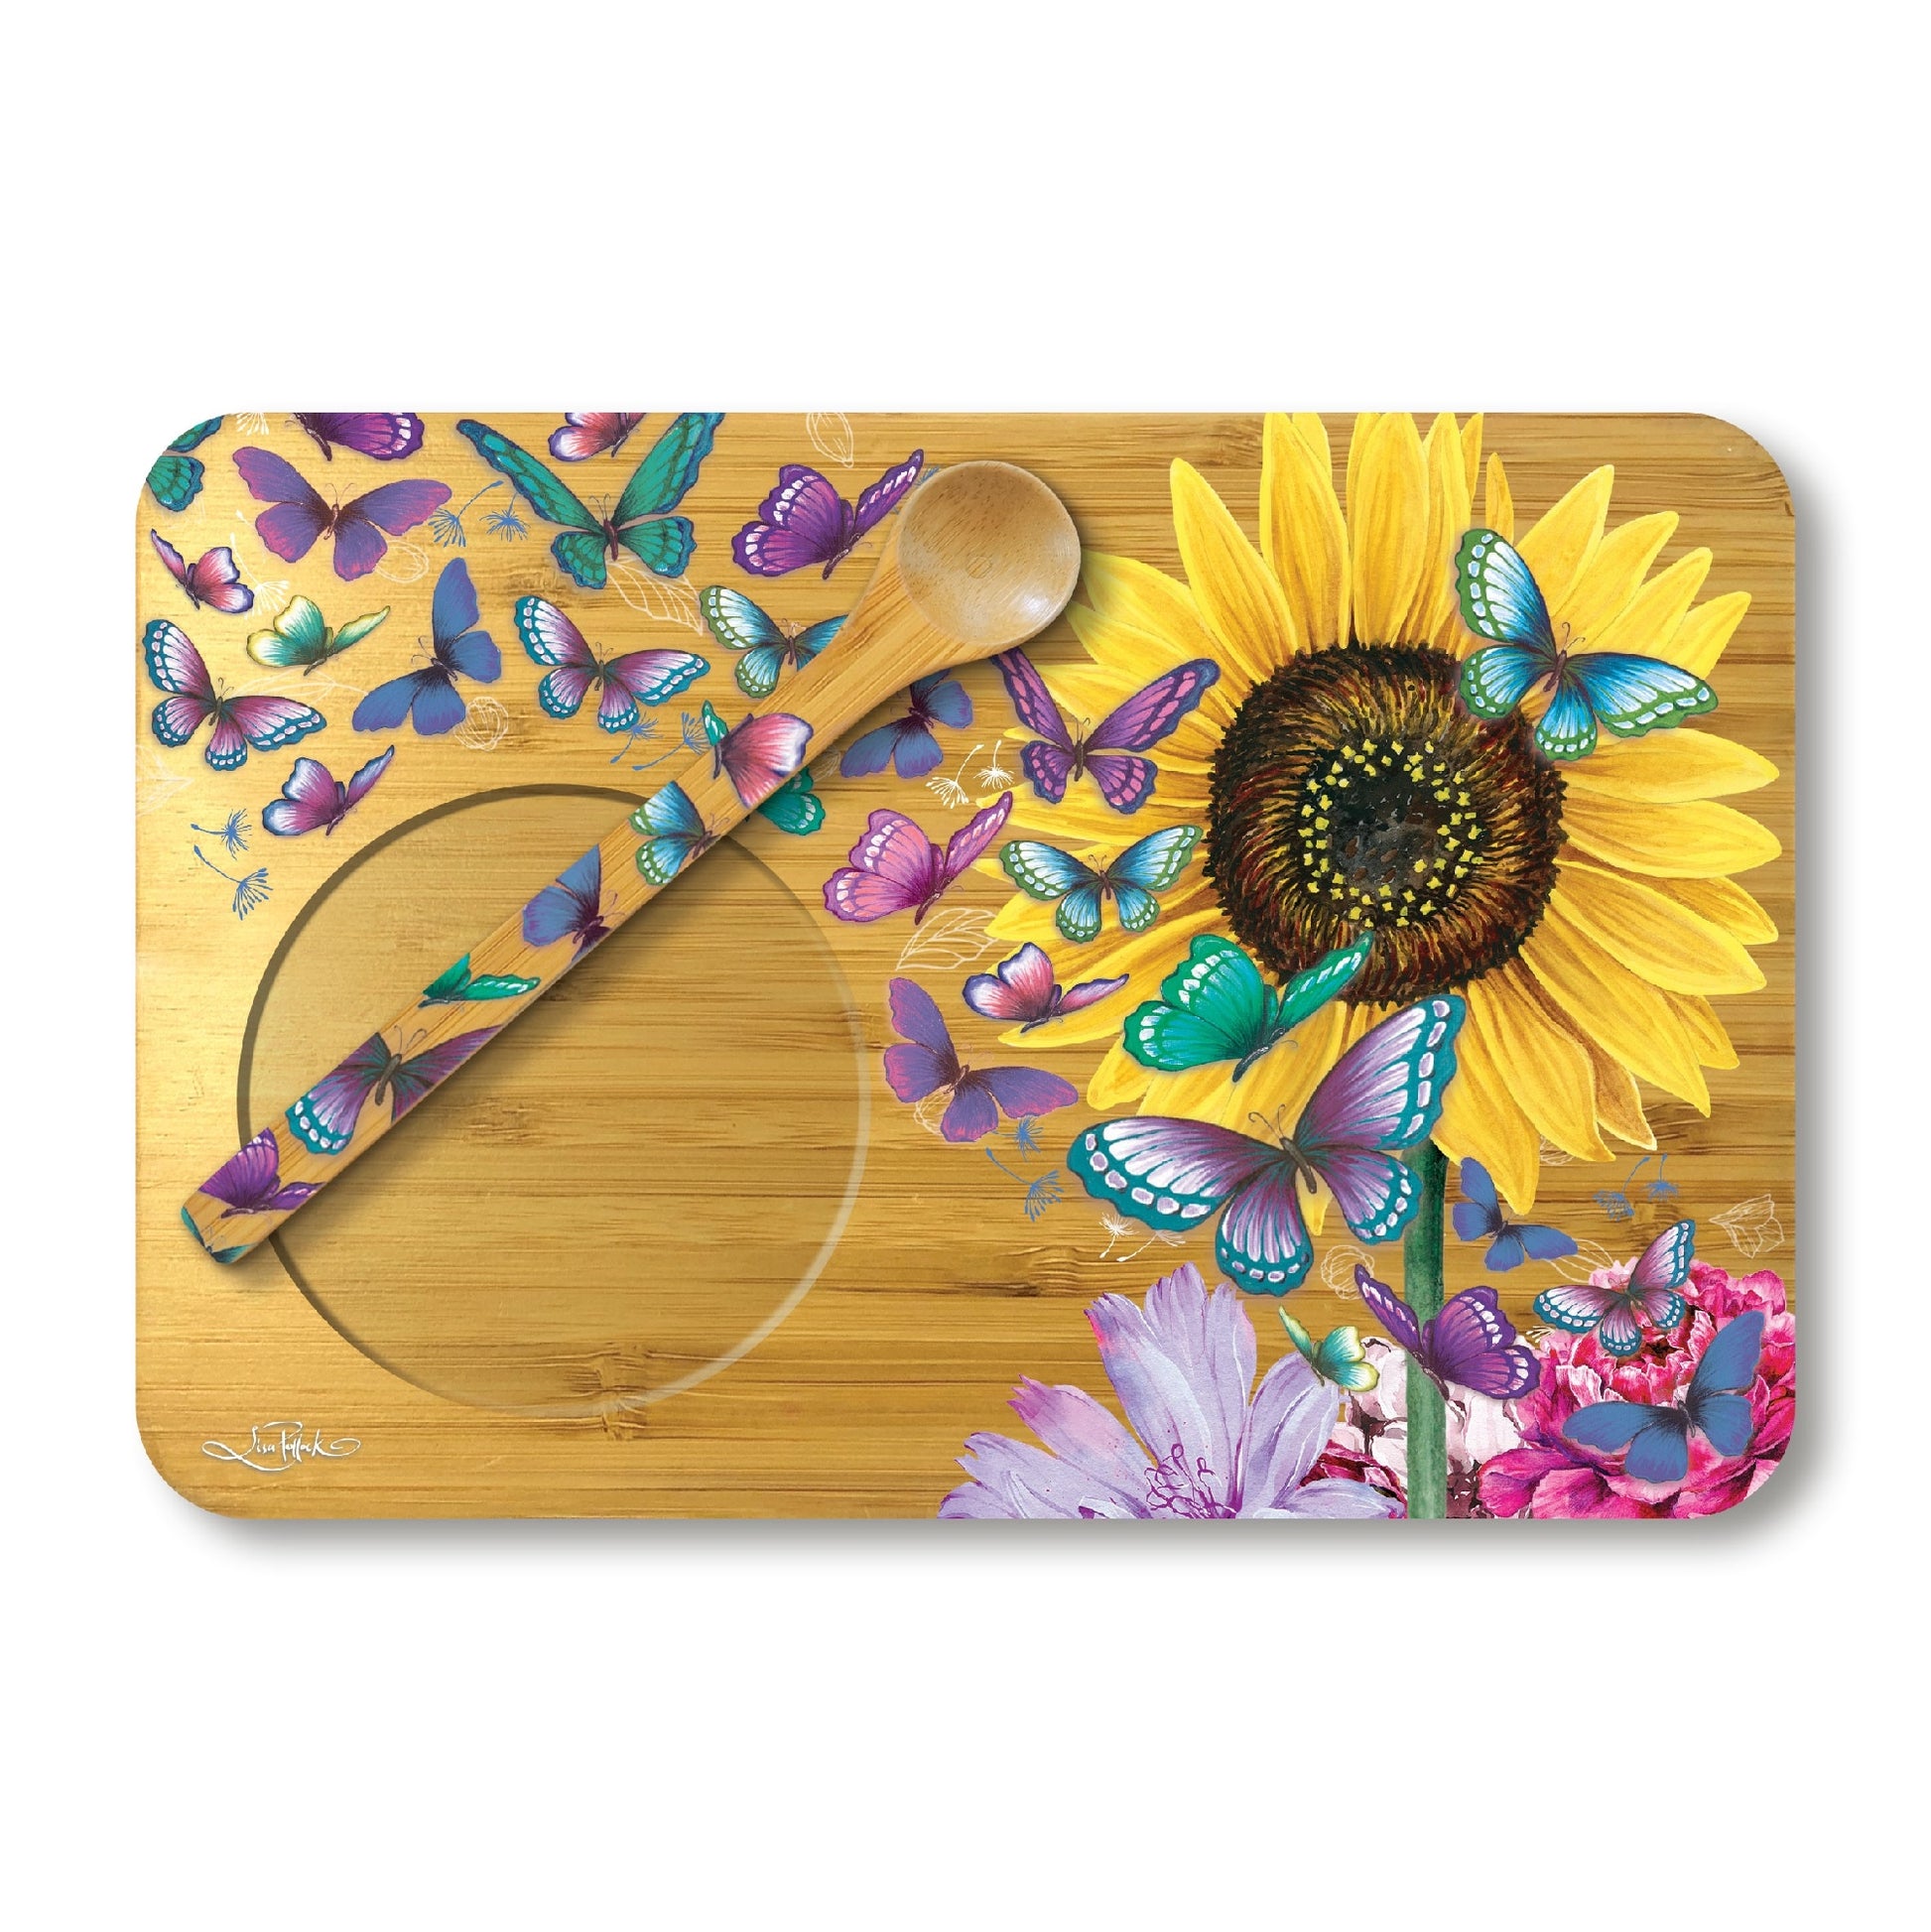 LISA POLLOCK BAMBOO TEA TIME TRAY WITH SPOON SUNNY BUTTERFLIES